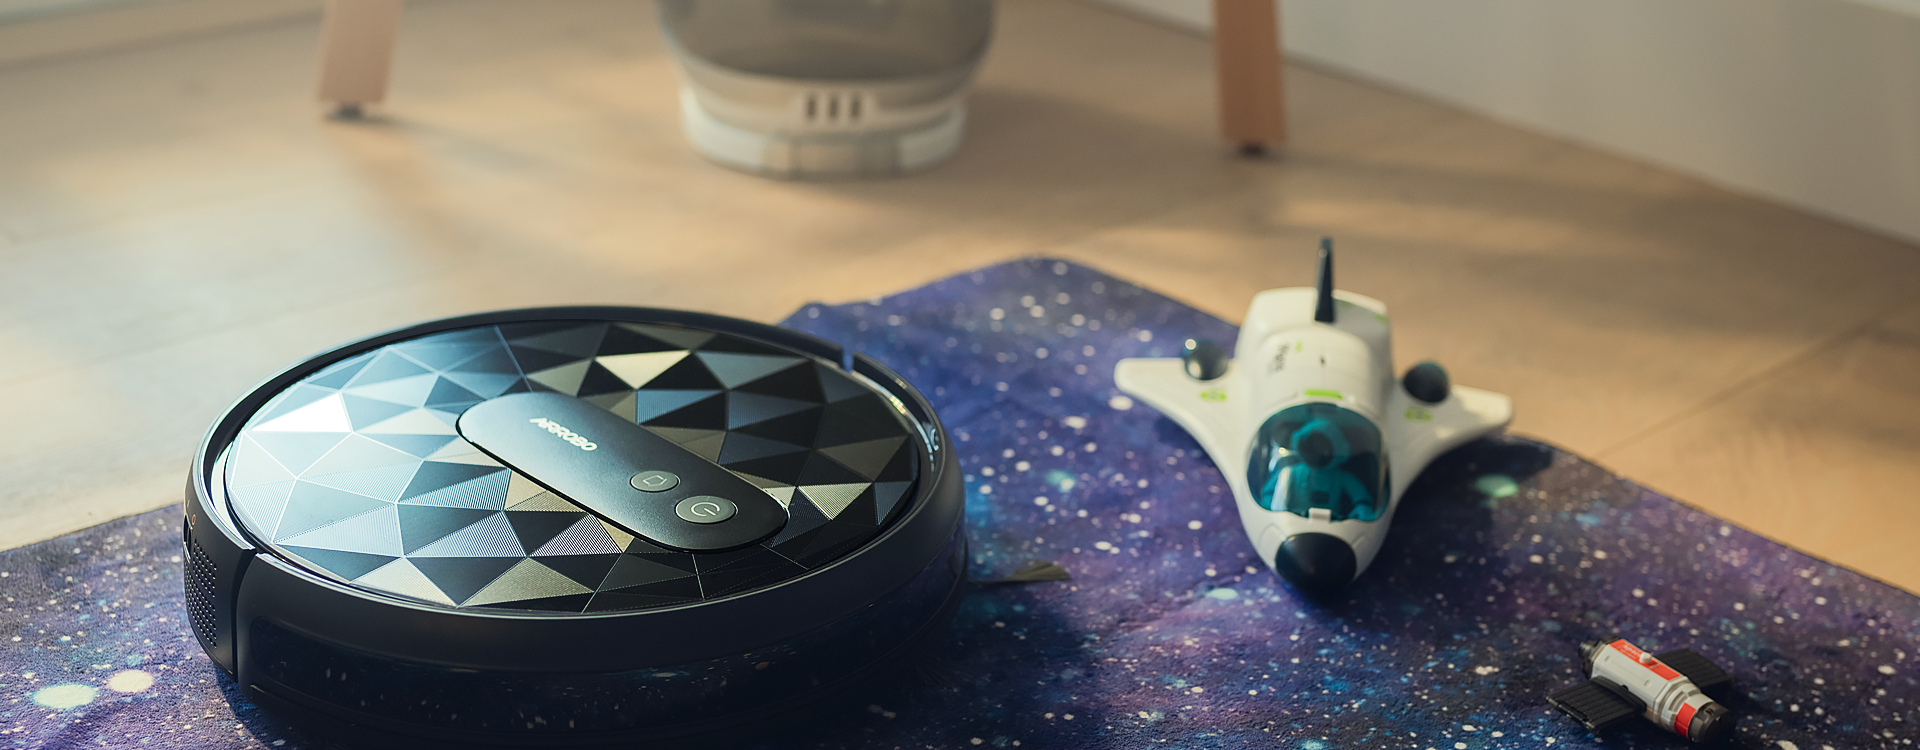 AIRROBO Robot Vacuum P20 review: basic but extremely affordable